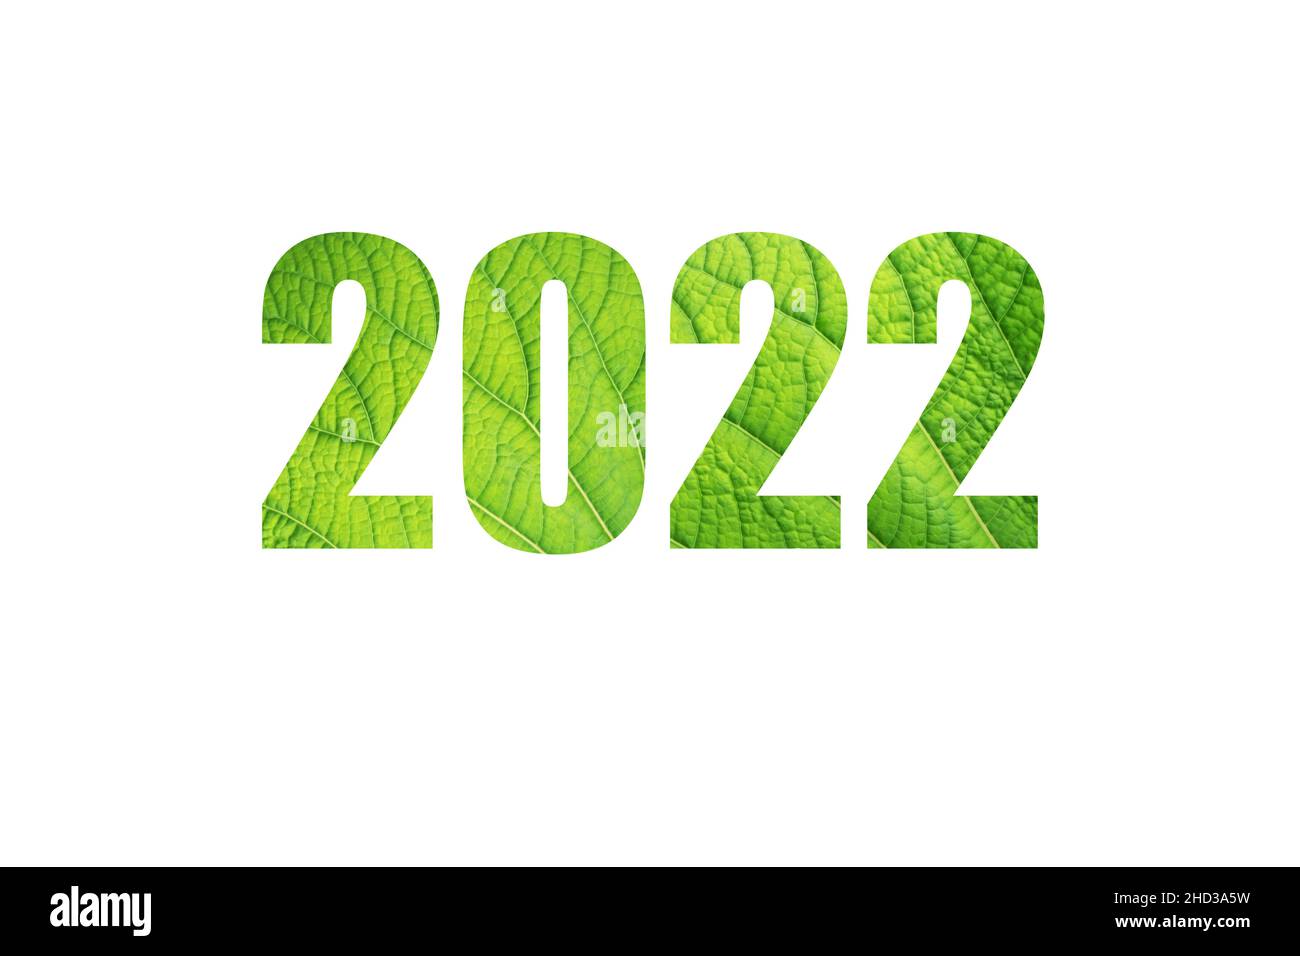 2022 new year digits covered with plant leave texture isolated on white. Green future concept. Stock Photo